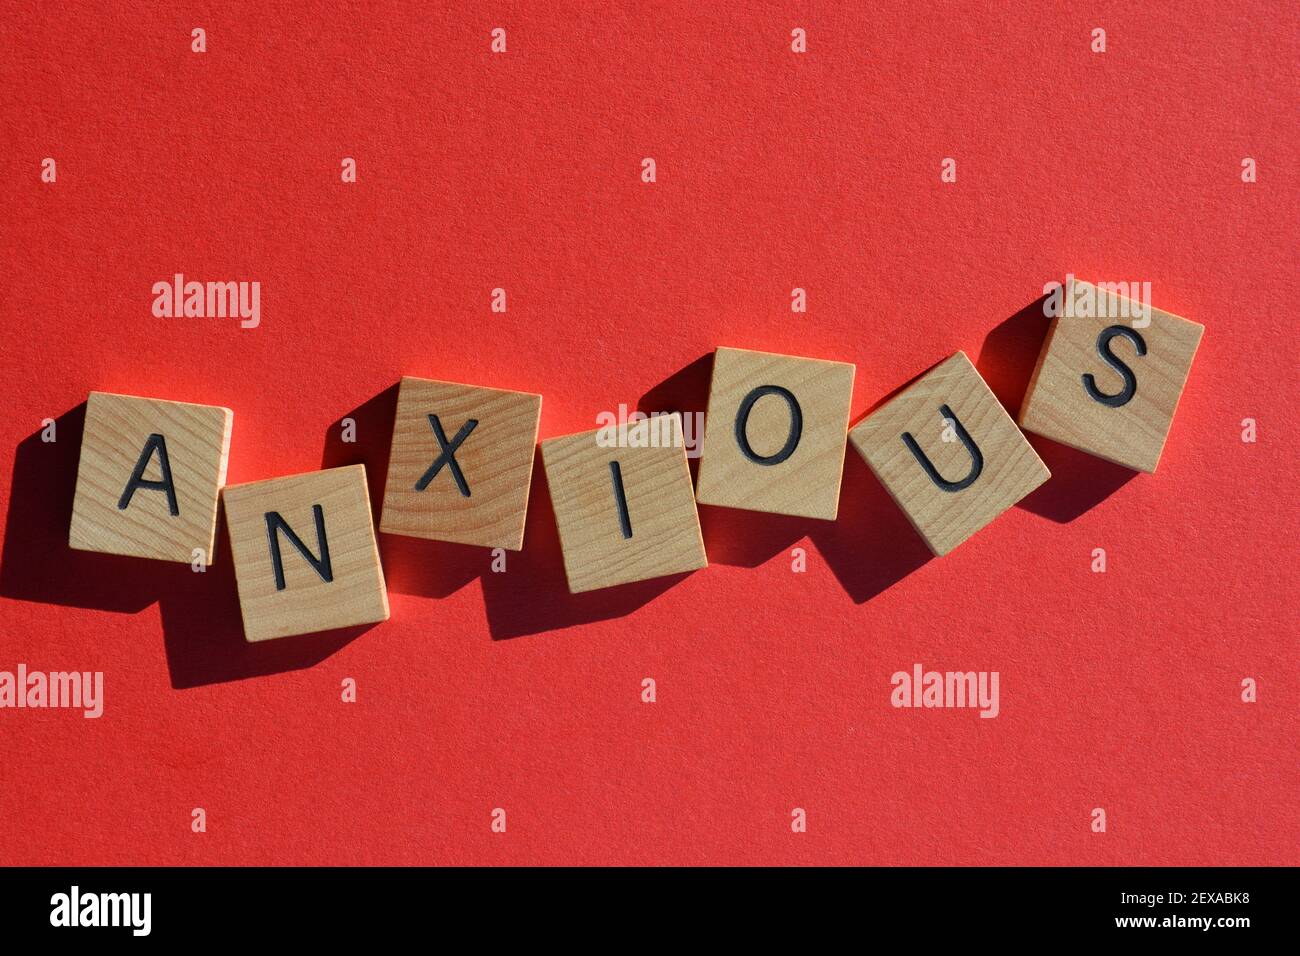 Anxious, word in wooden alphabet letters isolated on bright red background Stock Photo